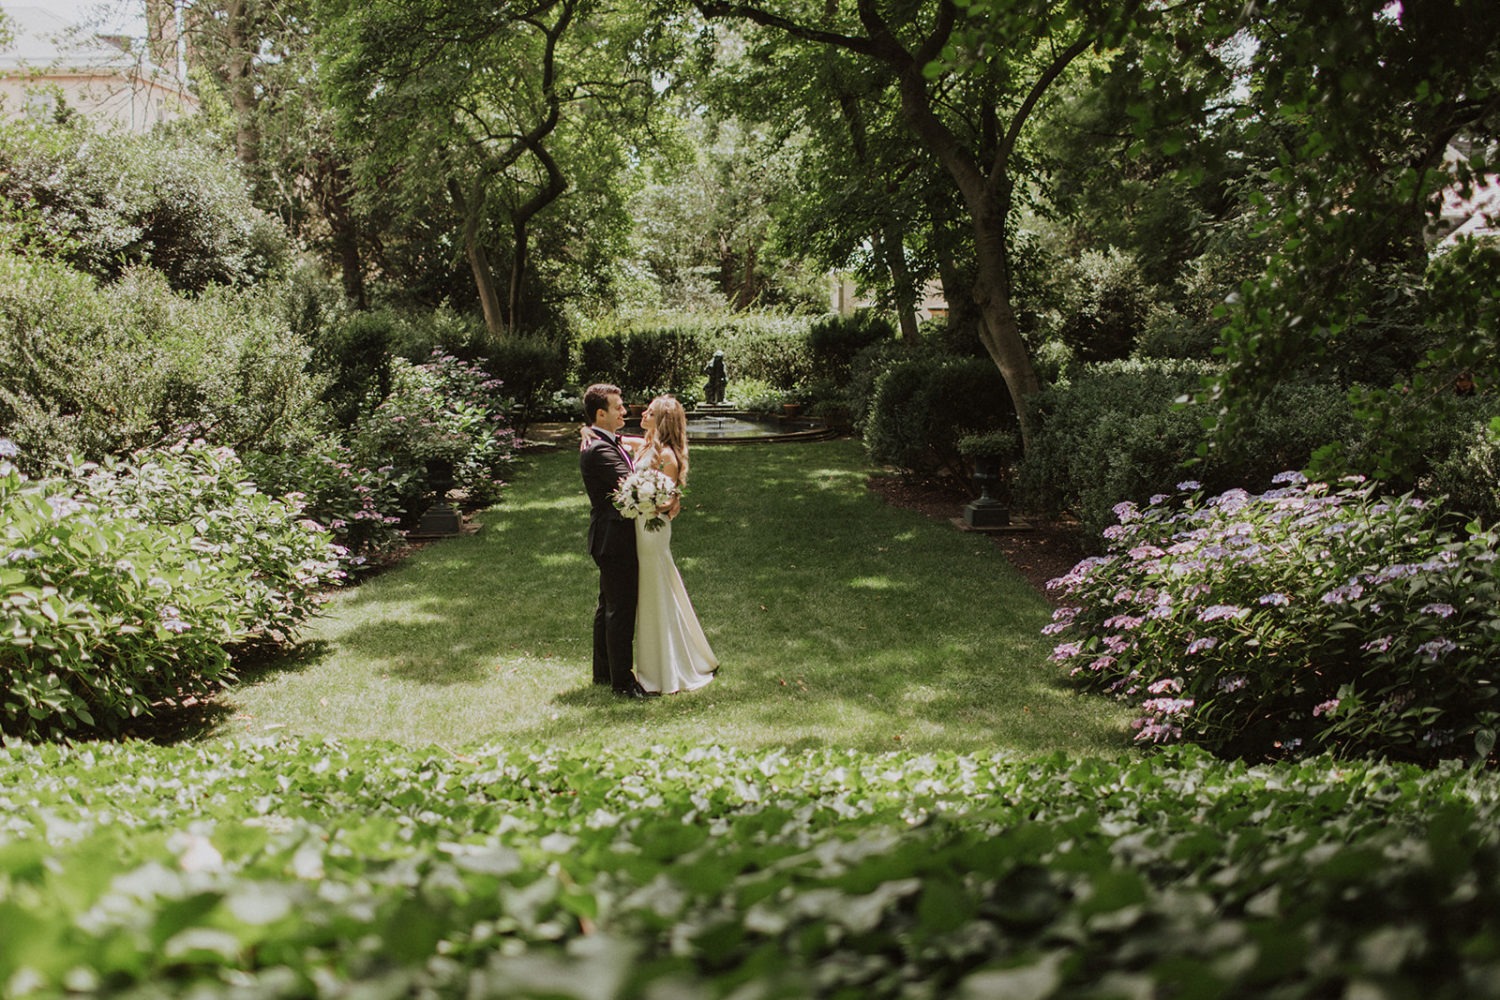 Couple embraces in garden at Georgetown Tudor Place wedding